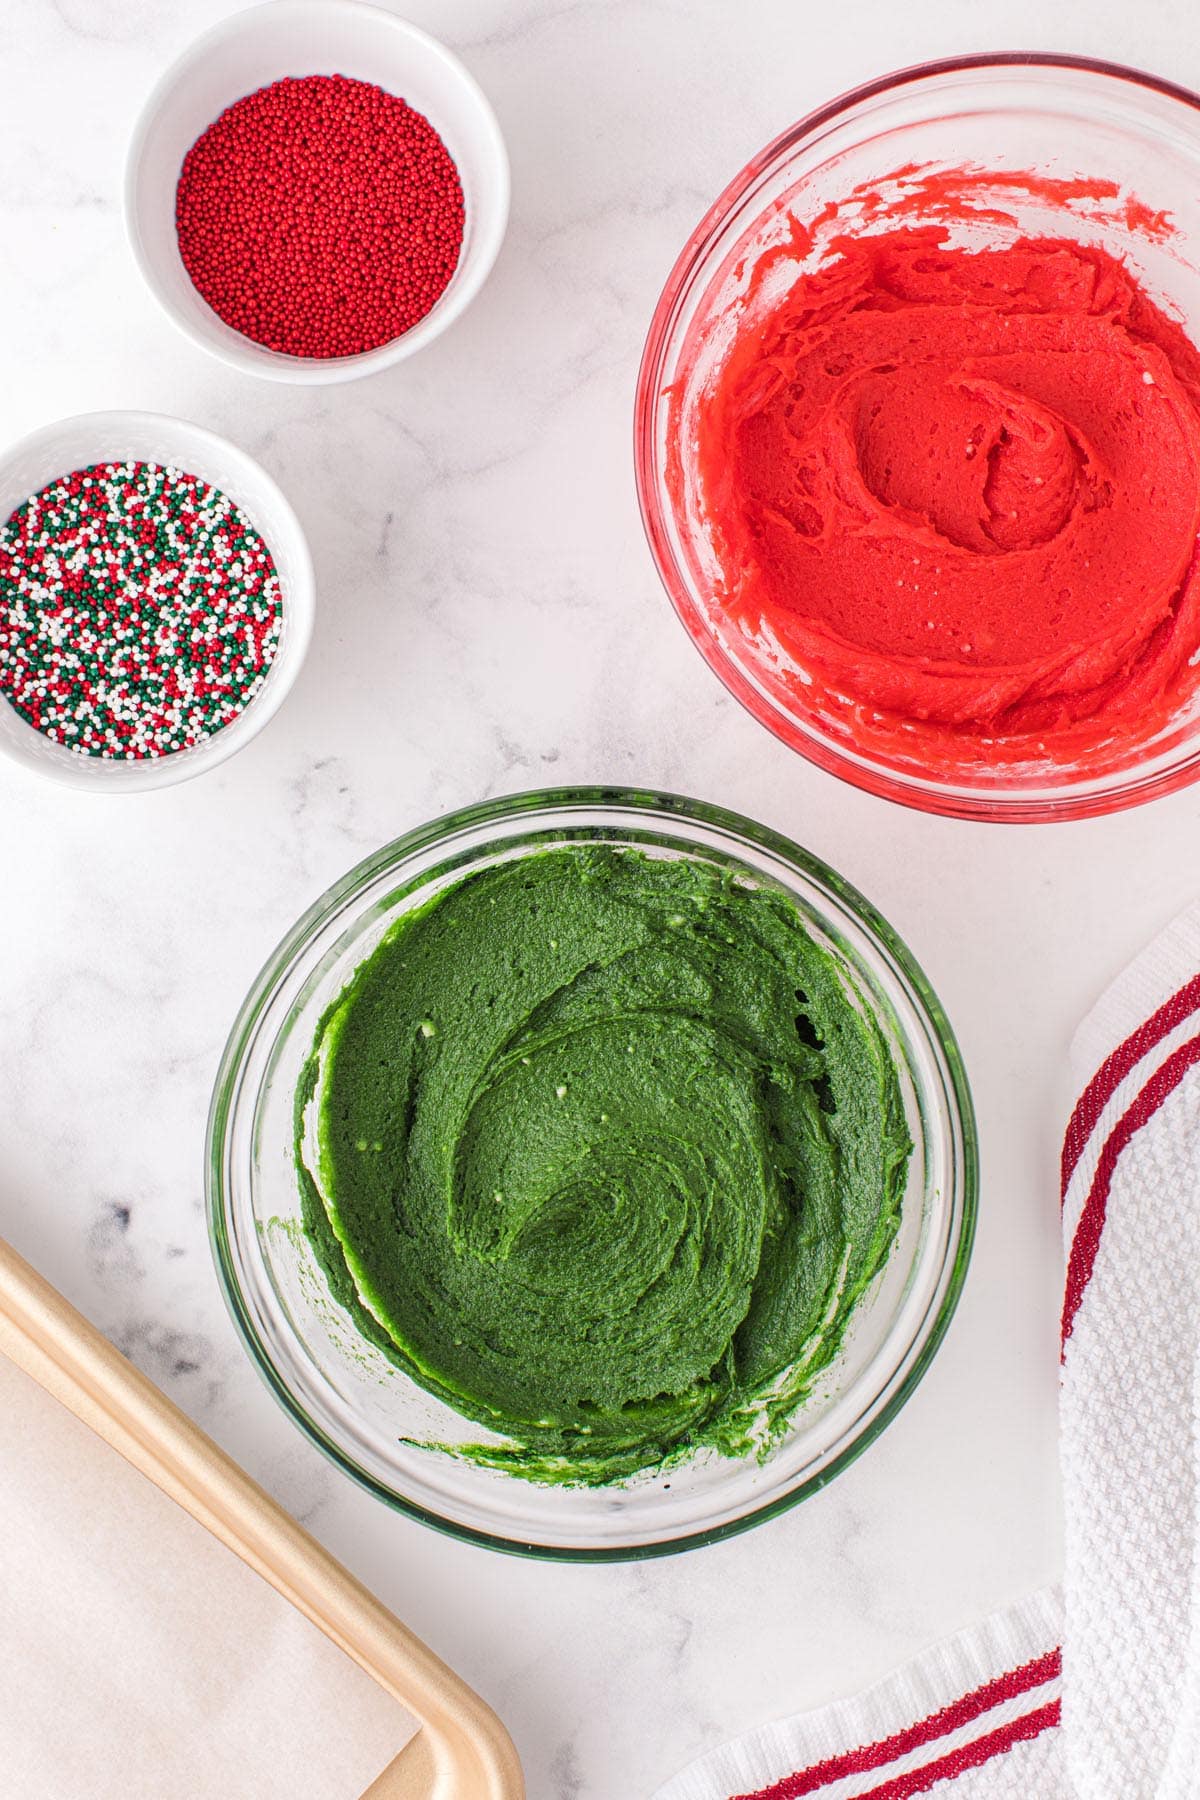 Add red and green food coloring to the dough